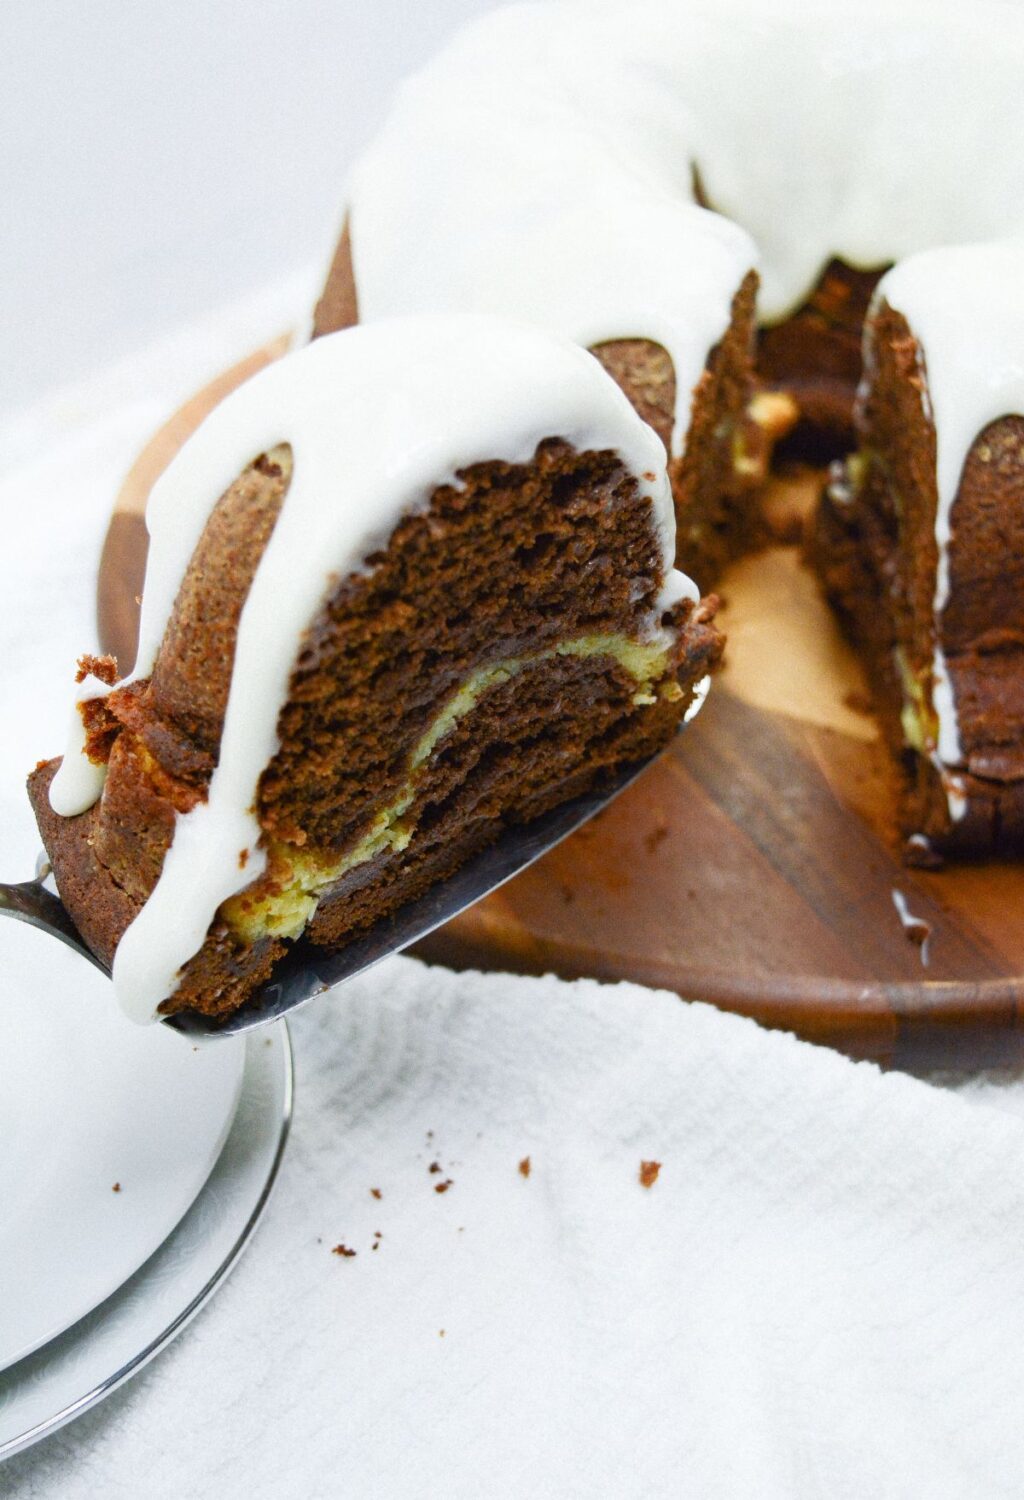 A chocolate bundt cake with icing on top.